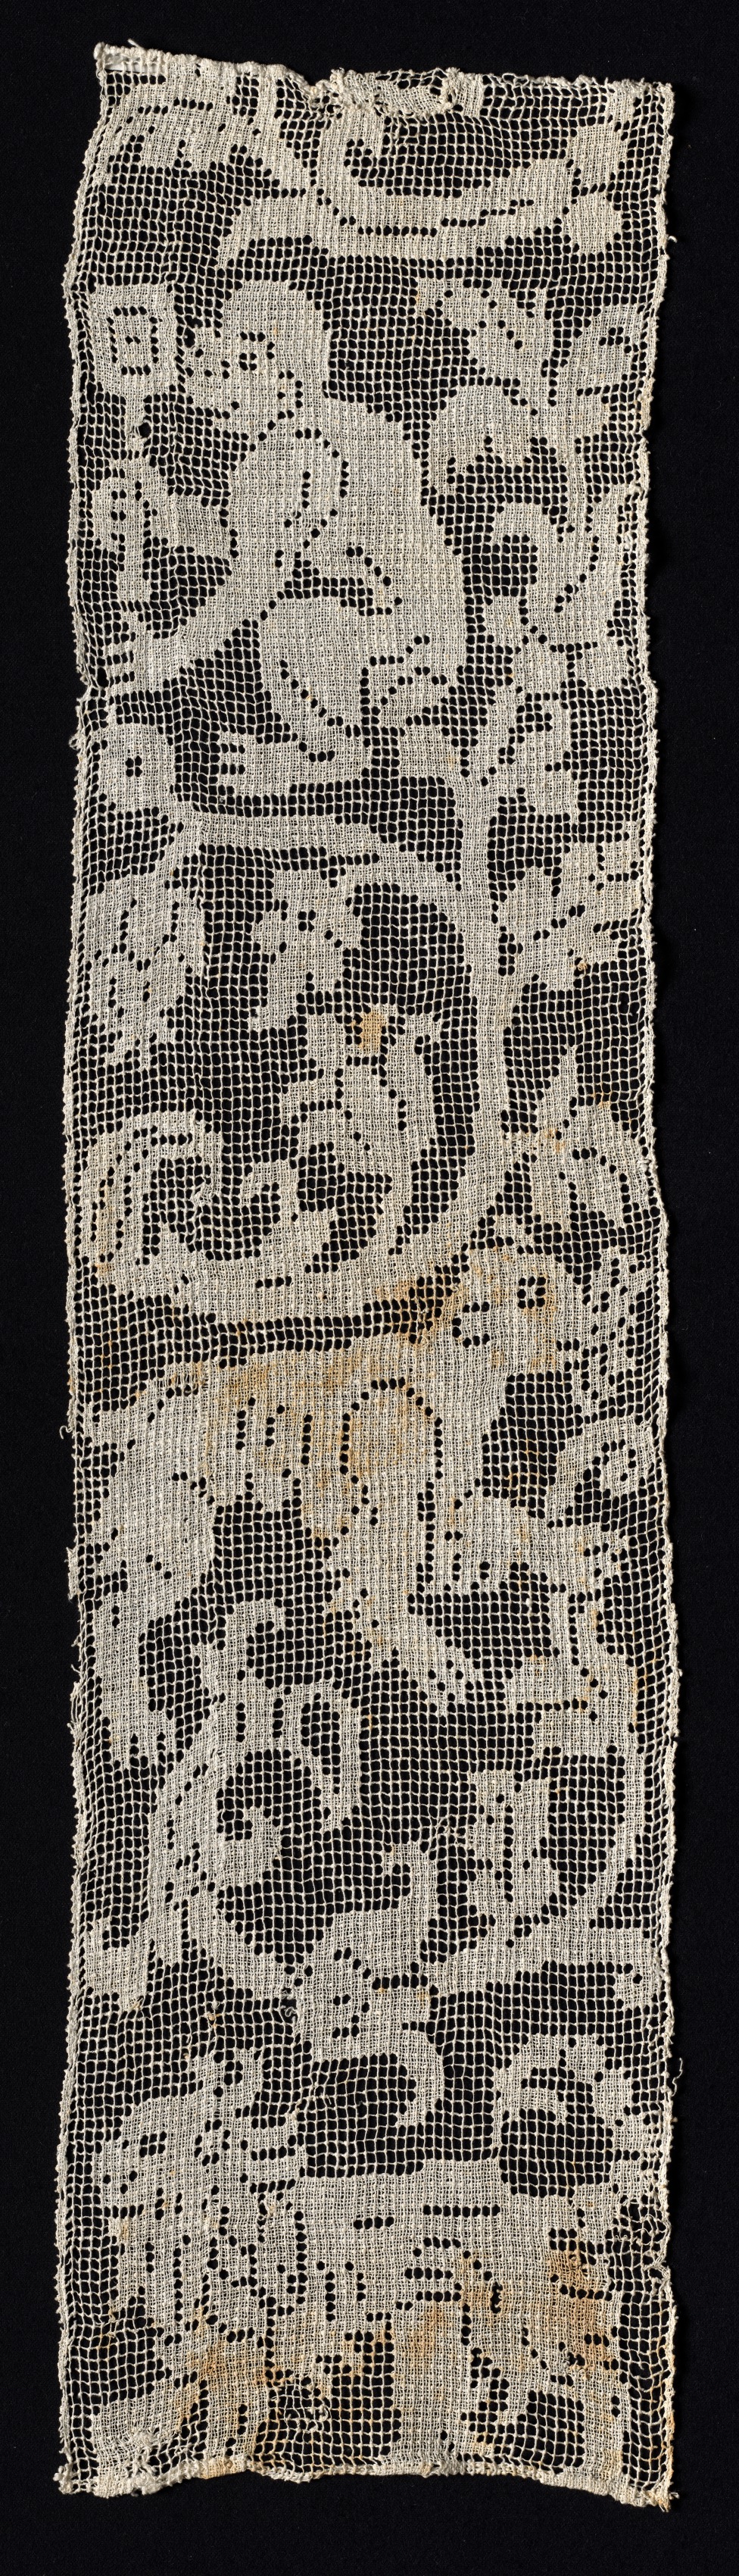 Fragment of a Band with Vines Surrounding a Monkey, Lion, and an Unidentified Four-Legged Animal